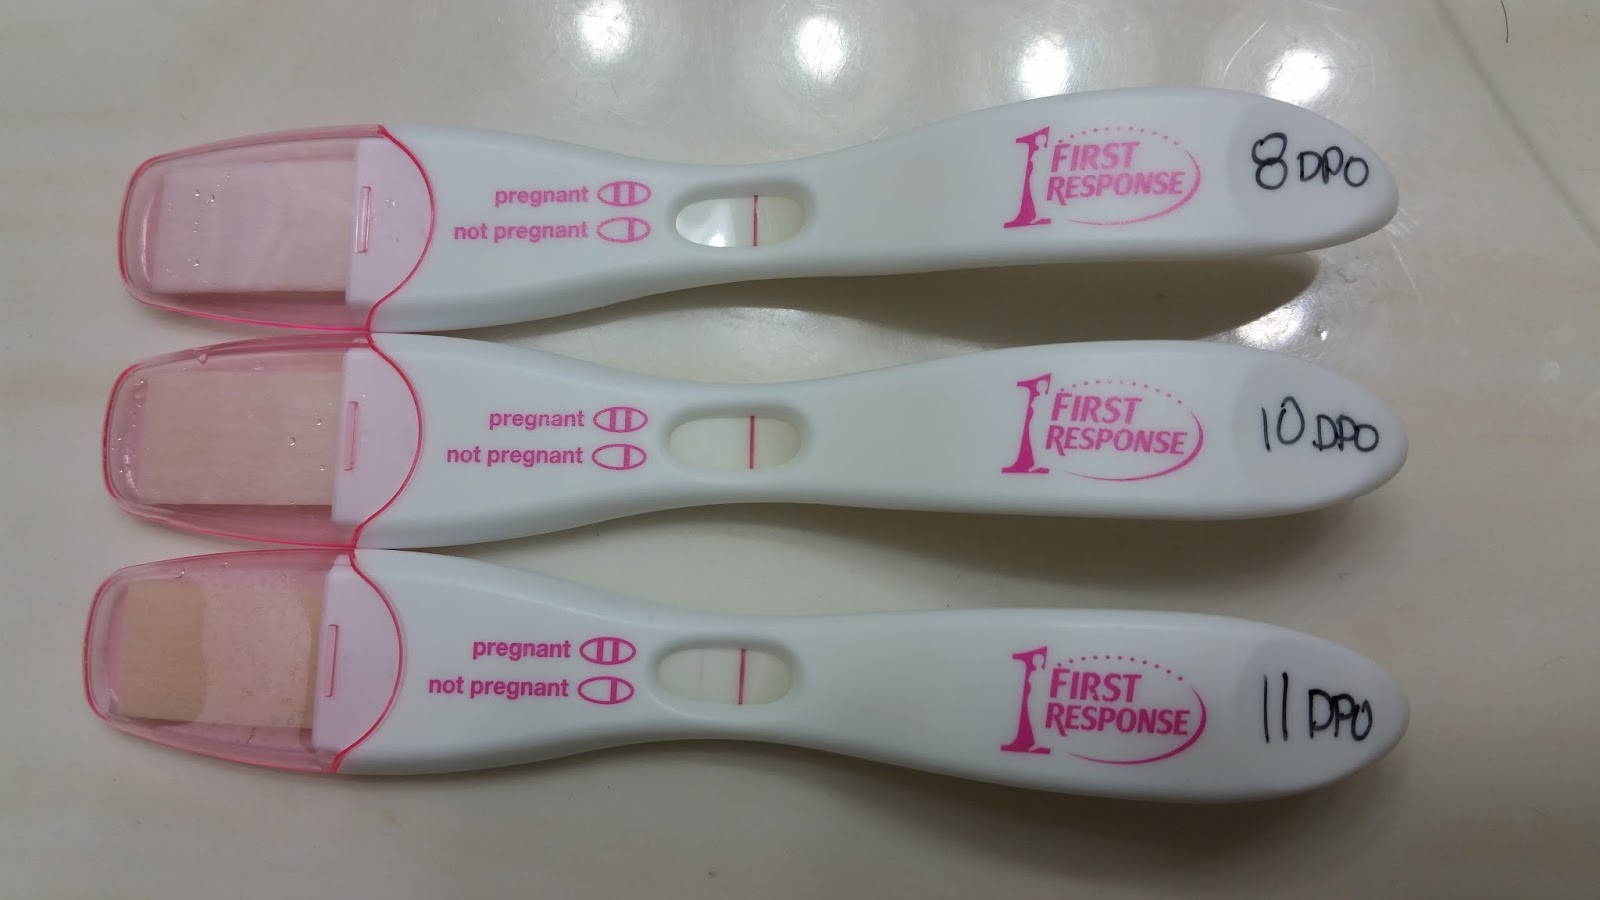 8 DPO - nothing 10 DPO - faintest line ever that you probably cannot see he...